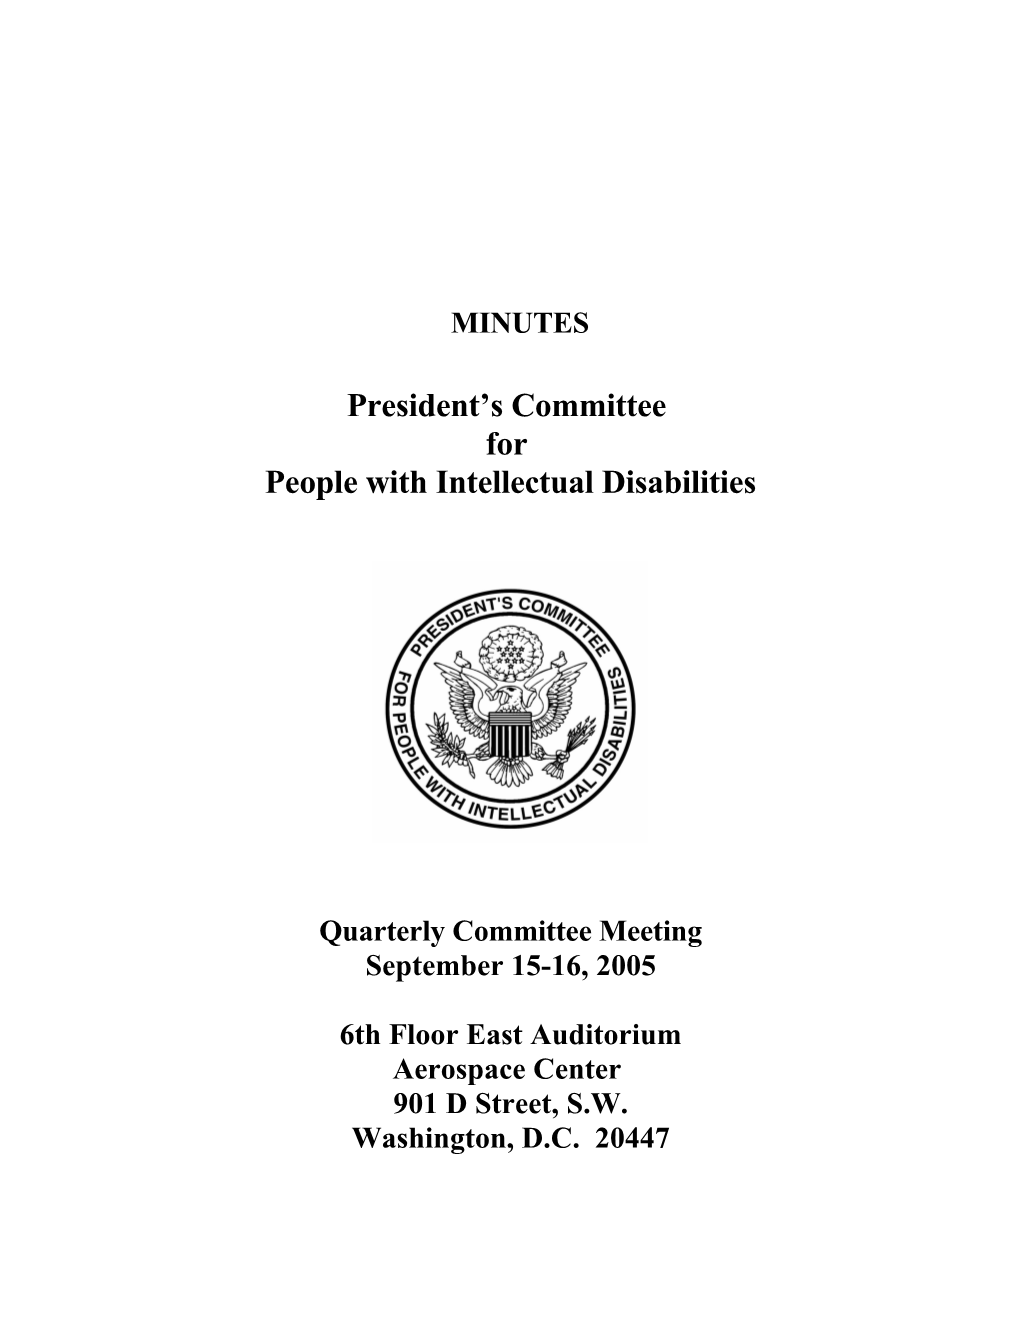 The Chair Convened the Quarterly Meeting of the President S Committee for People With